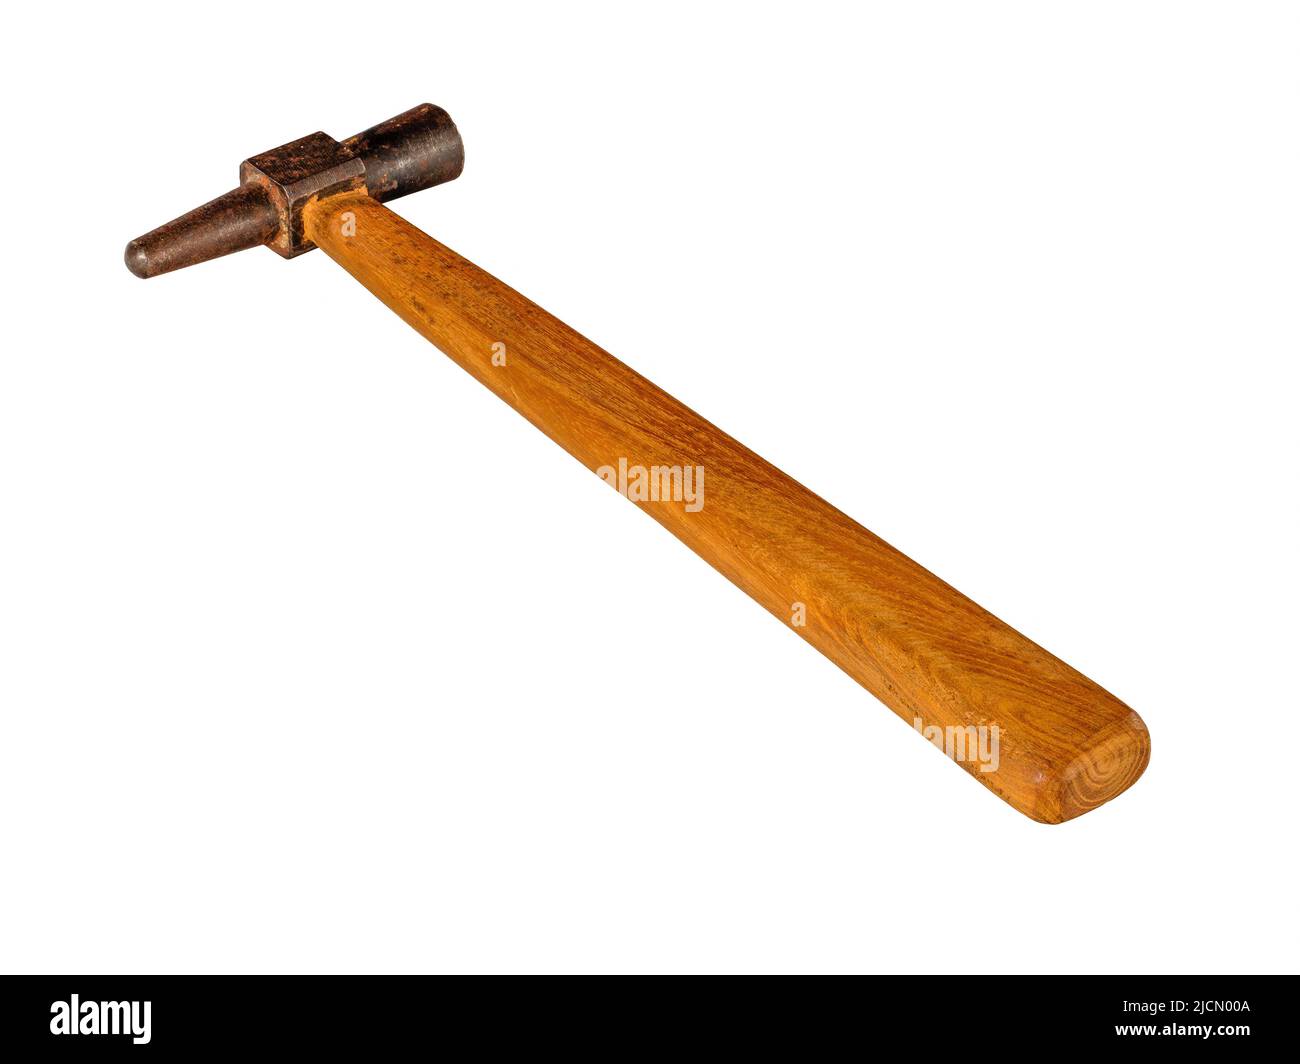 Rusty claw hammer with wooden handle isolated on white background Stock Photo